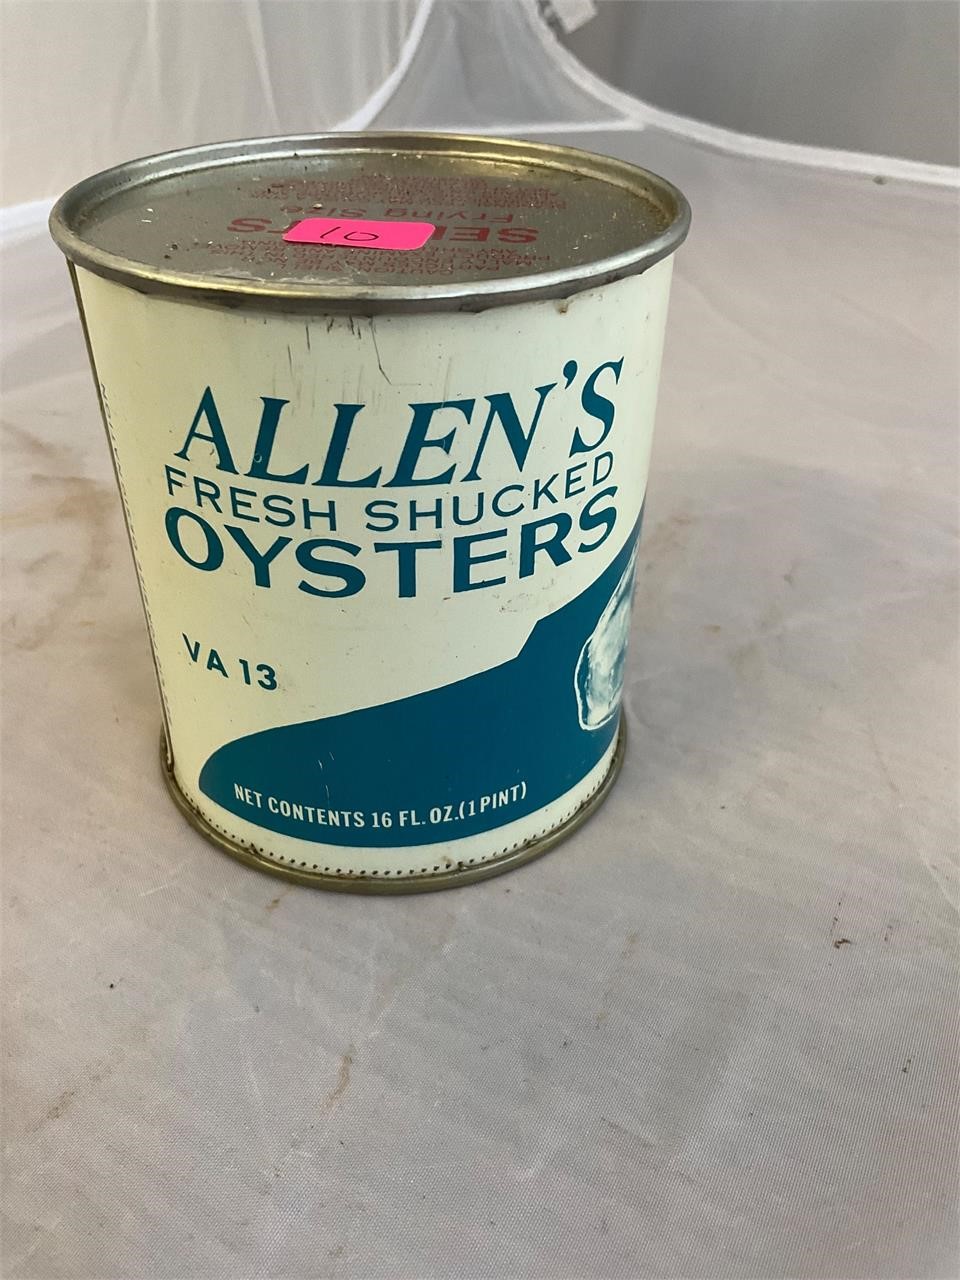 Allens Va 13 Coles Point Pint Oyster Can